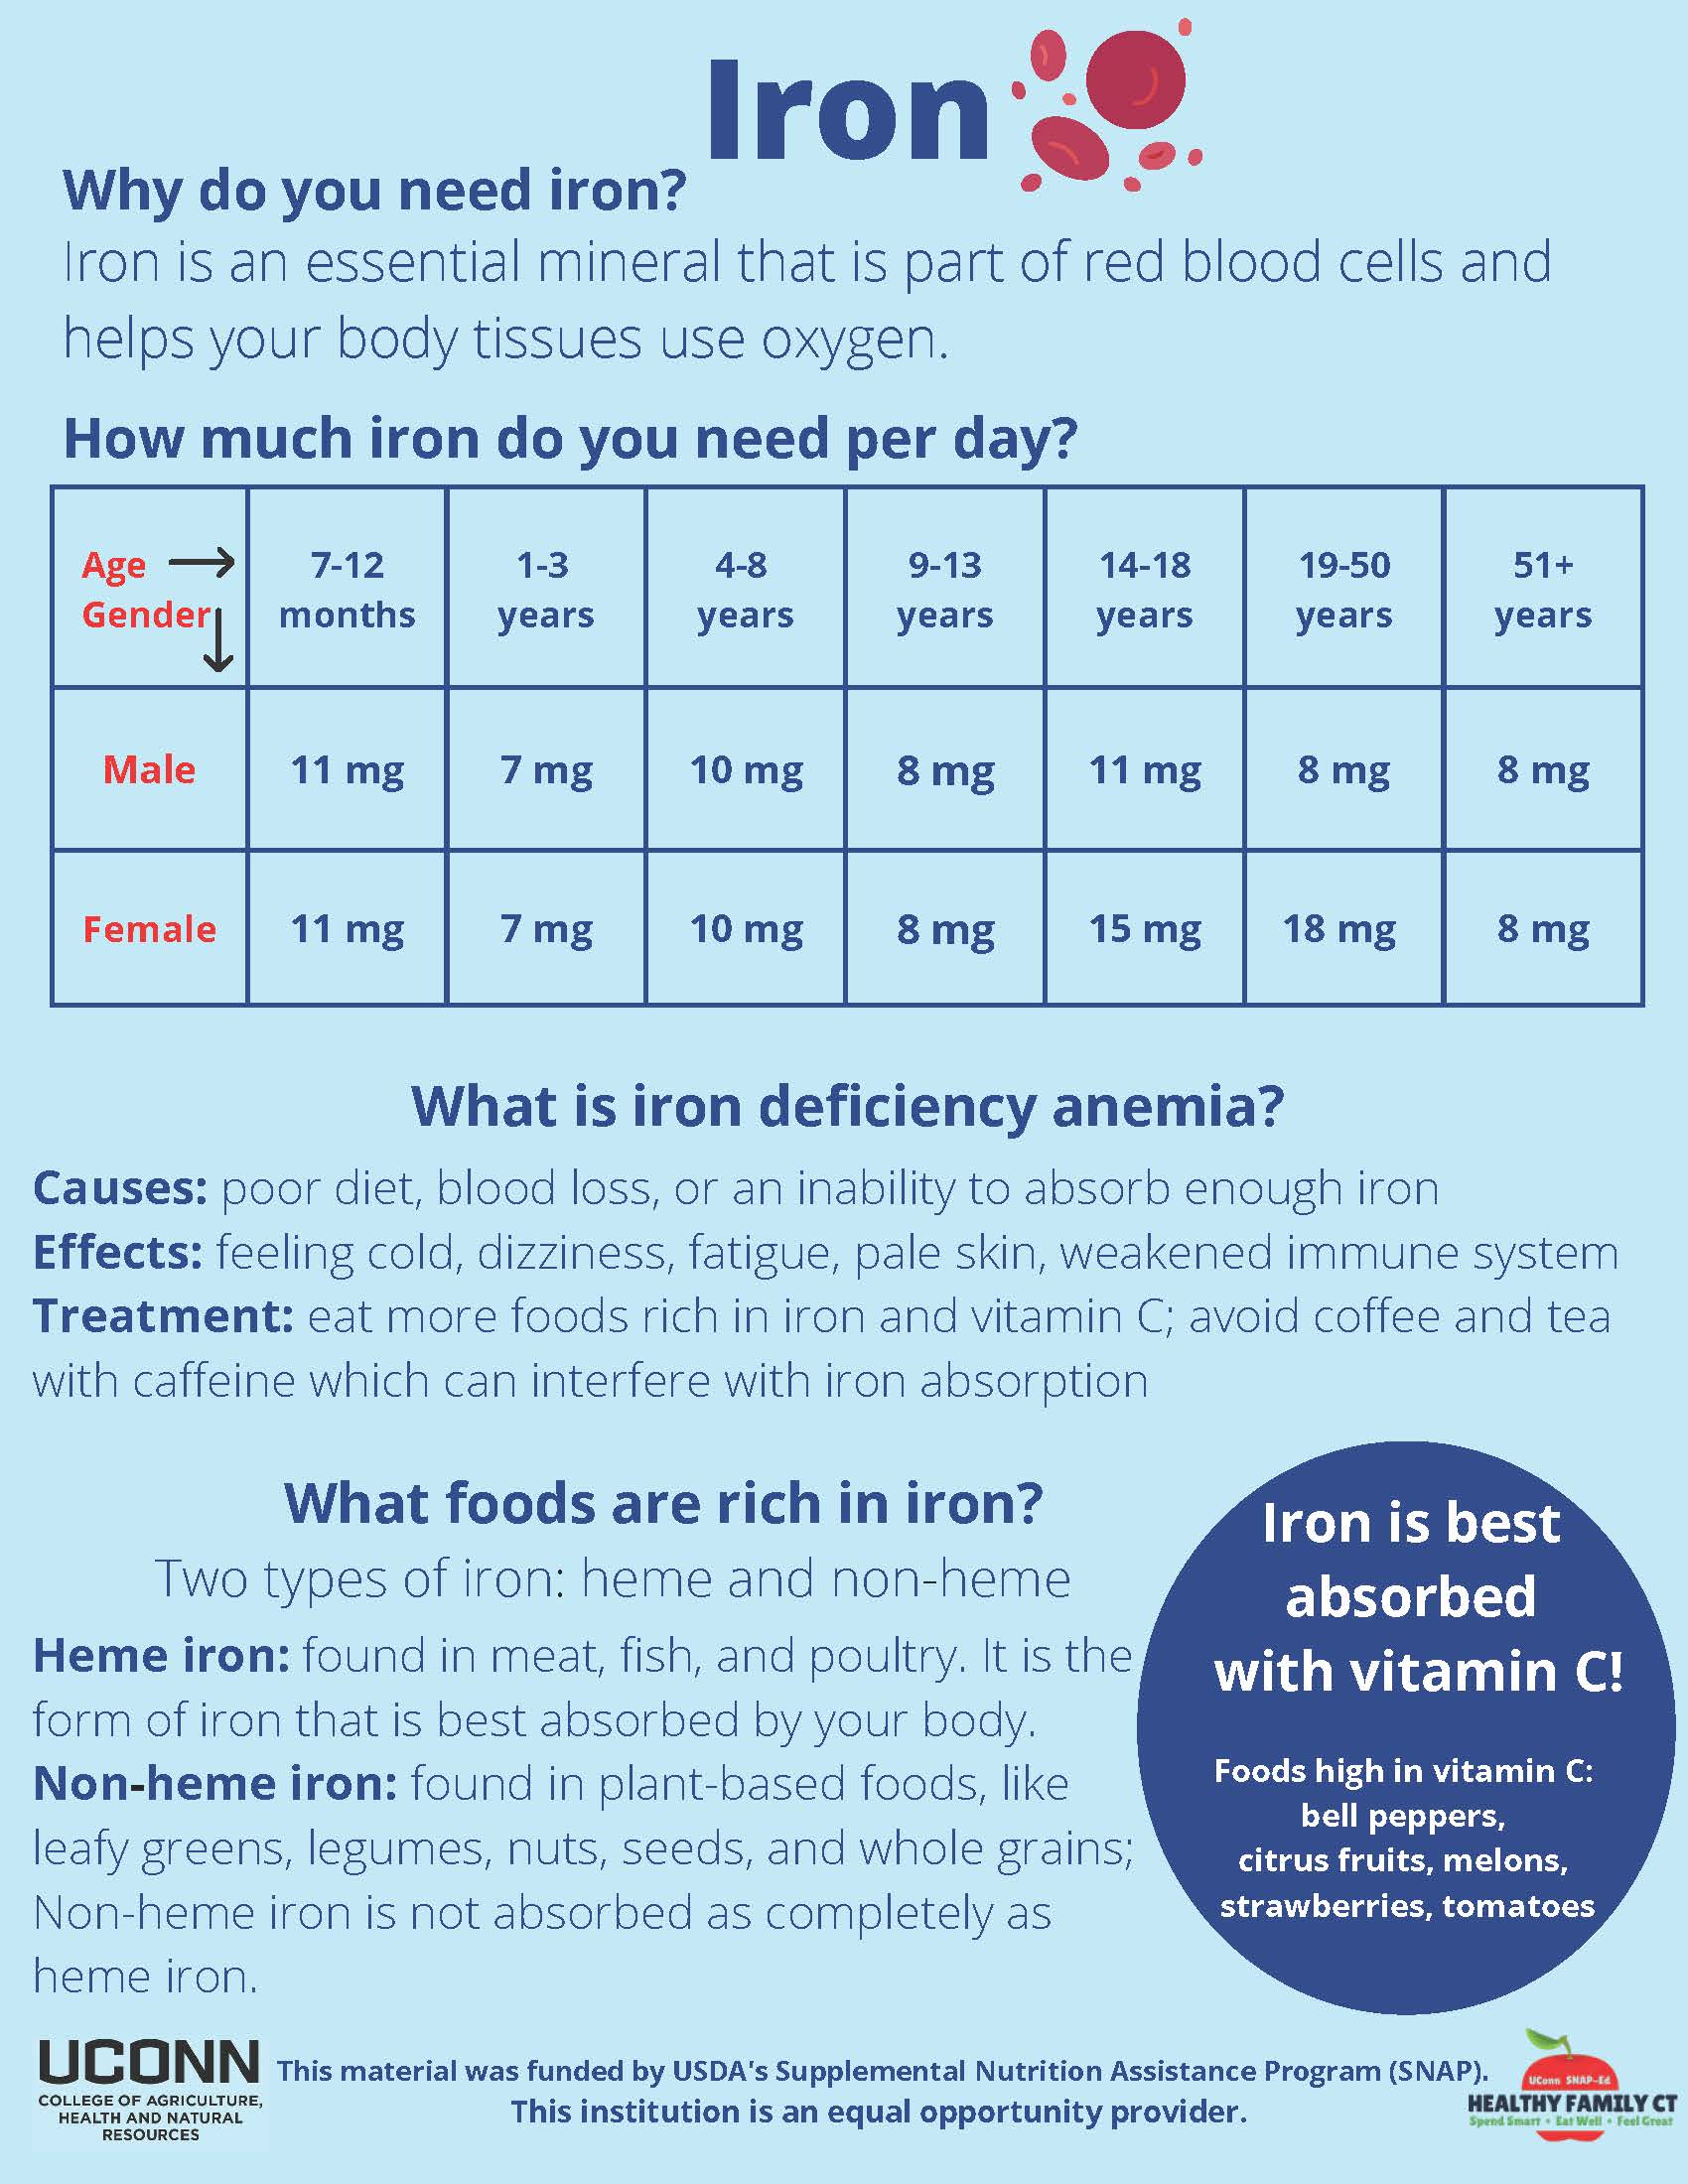 iron benefits and food sources